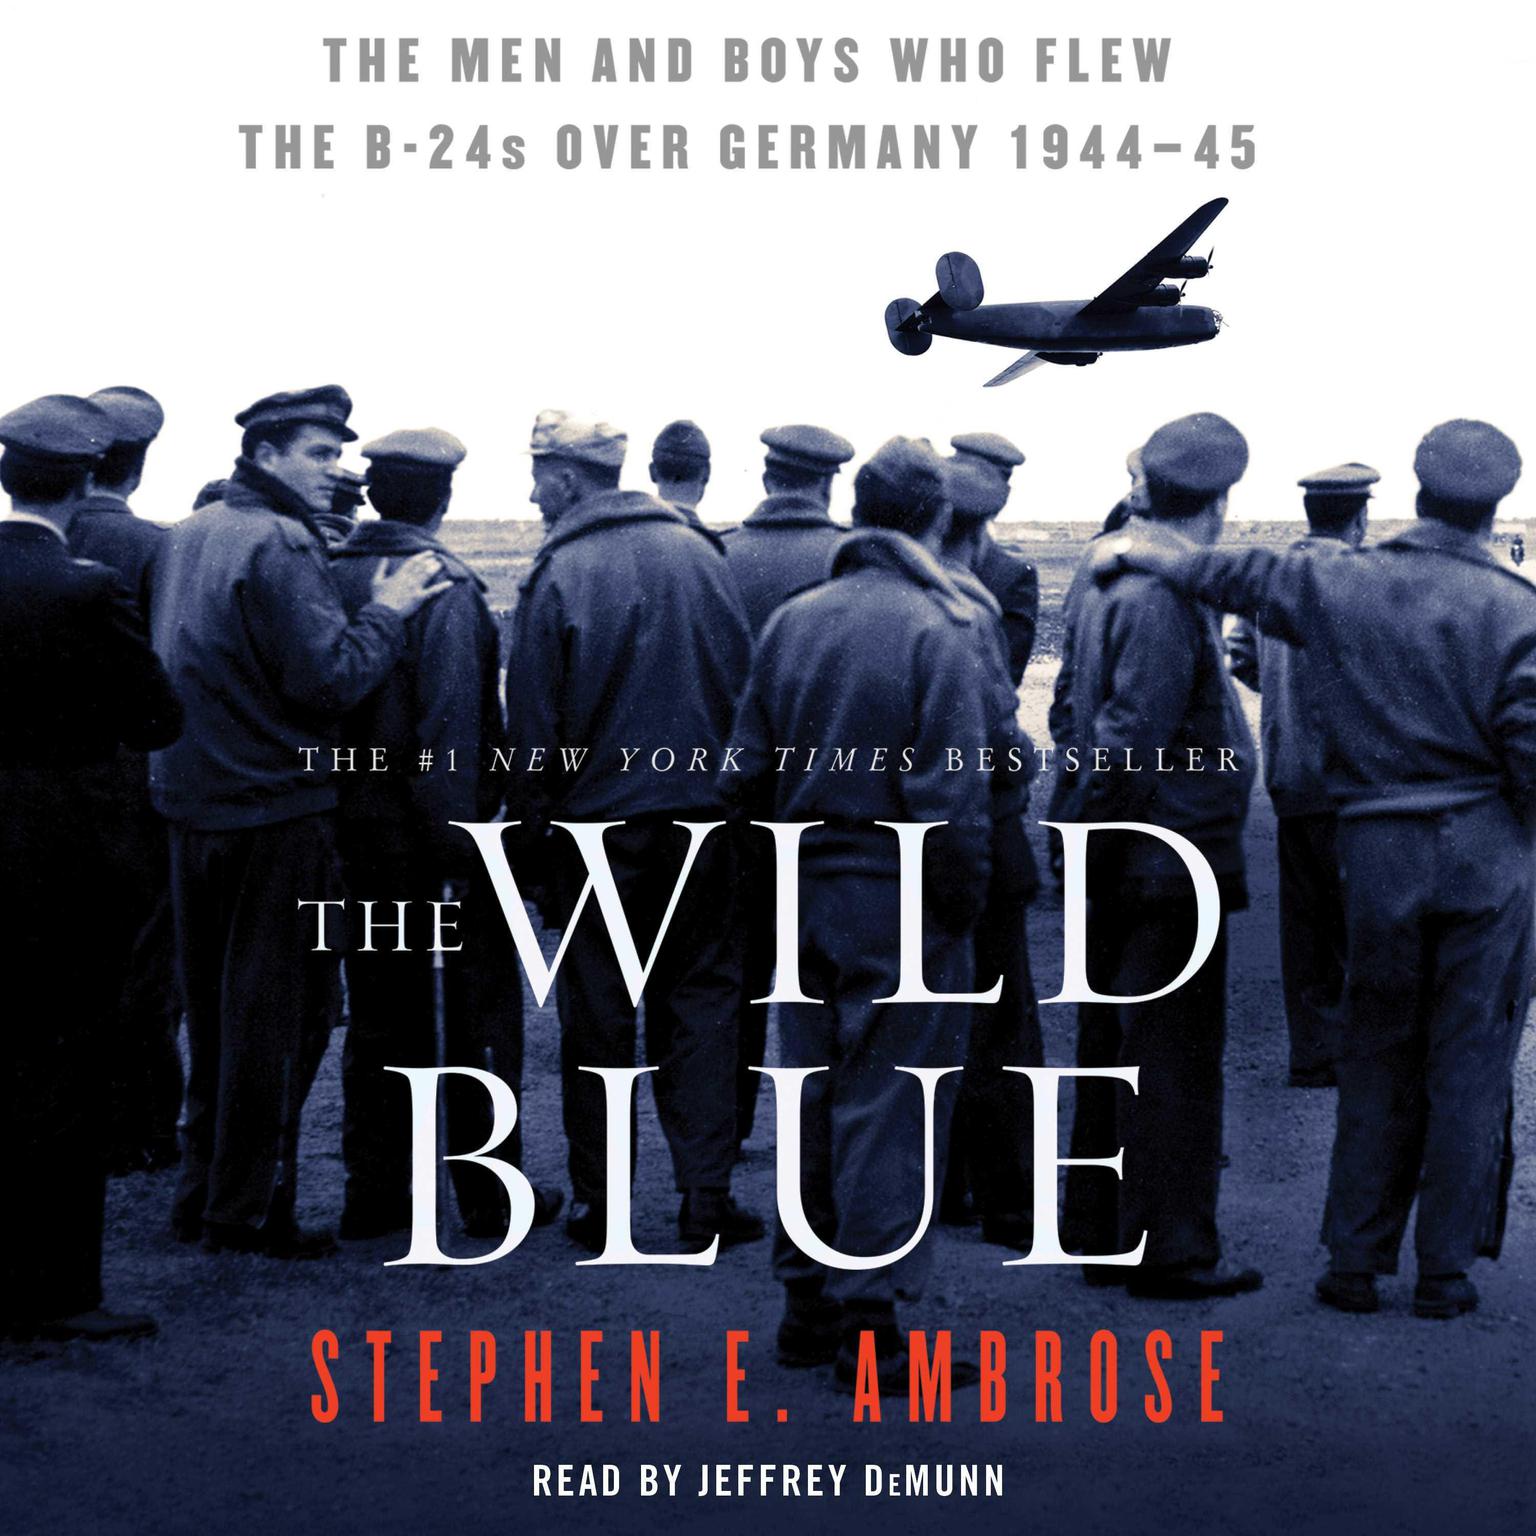 The Wild Blue (Abridged): The Men and Boys Who Flew the B-24s Over Germany 1944-45 Audiobook, by Stephen E. Ambrose